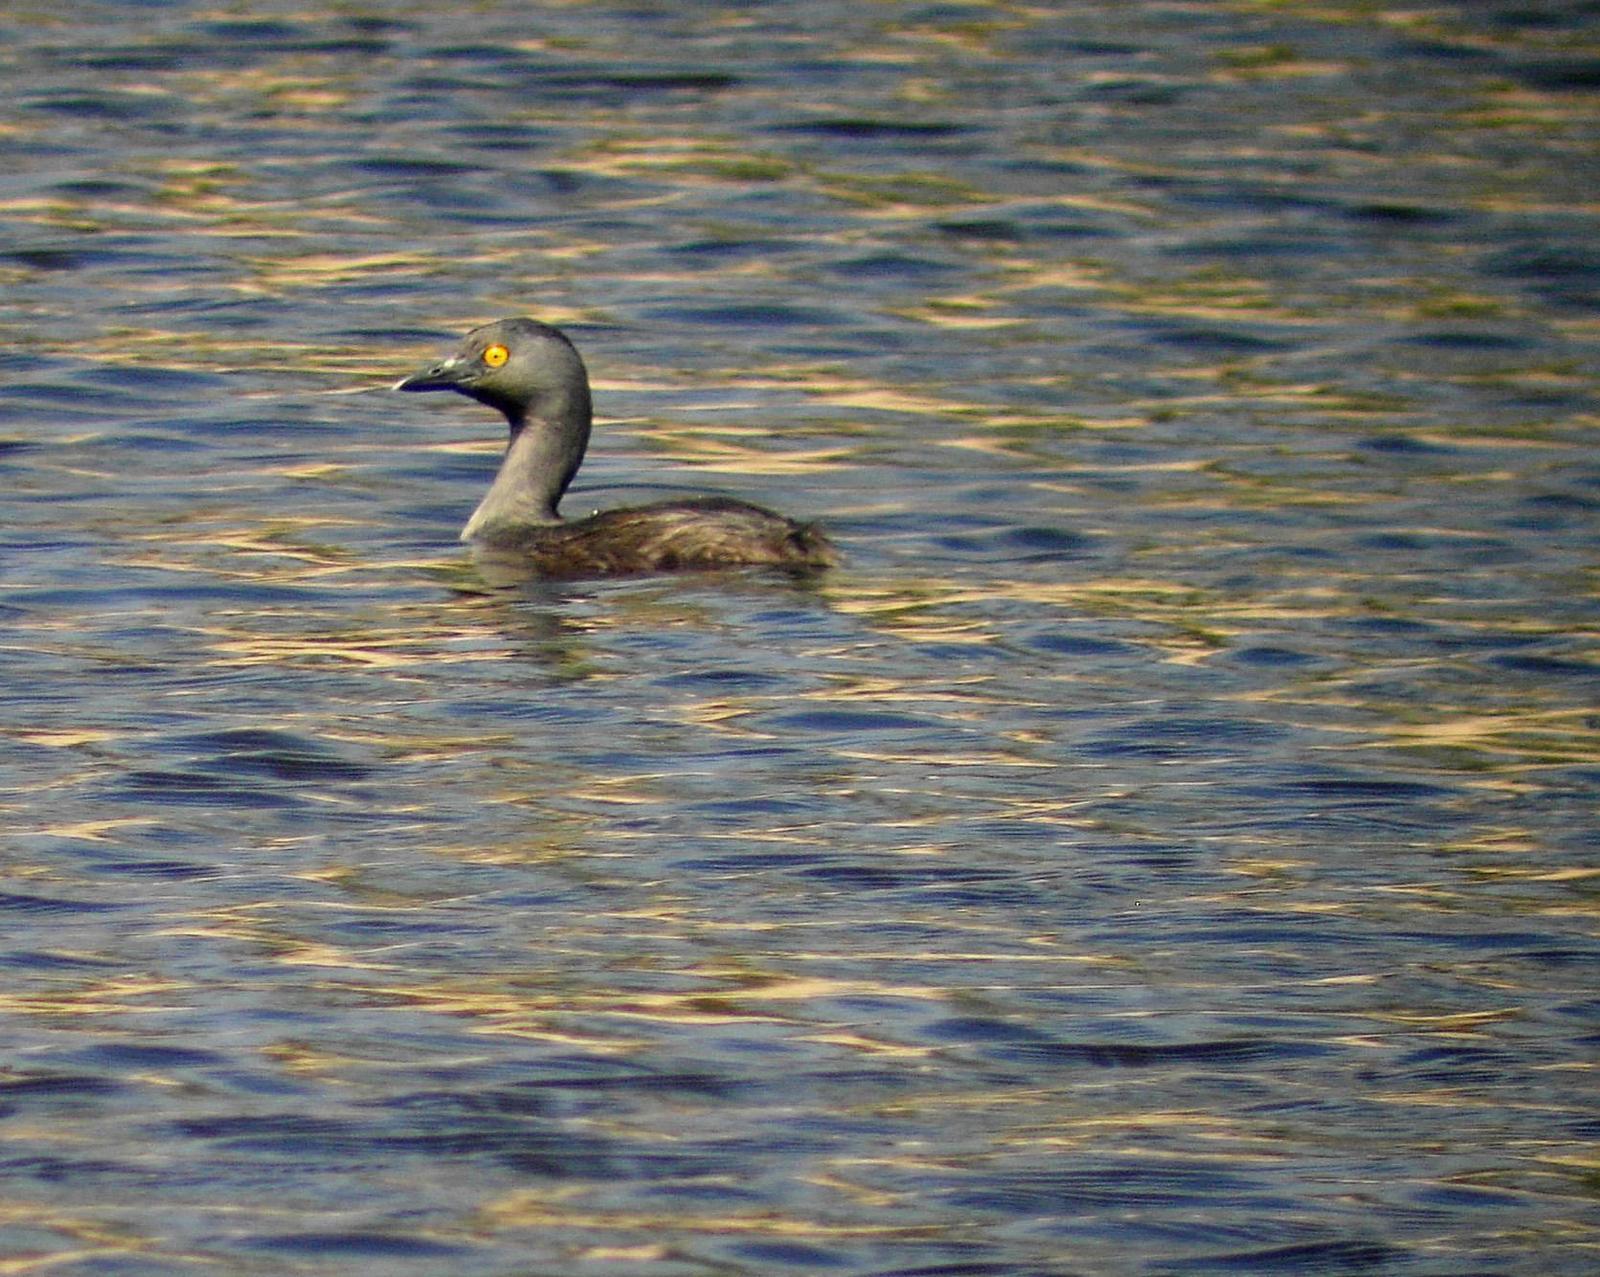 Least Grebe Photo by Steven Mlodinow